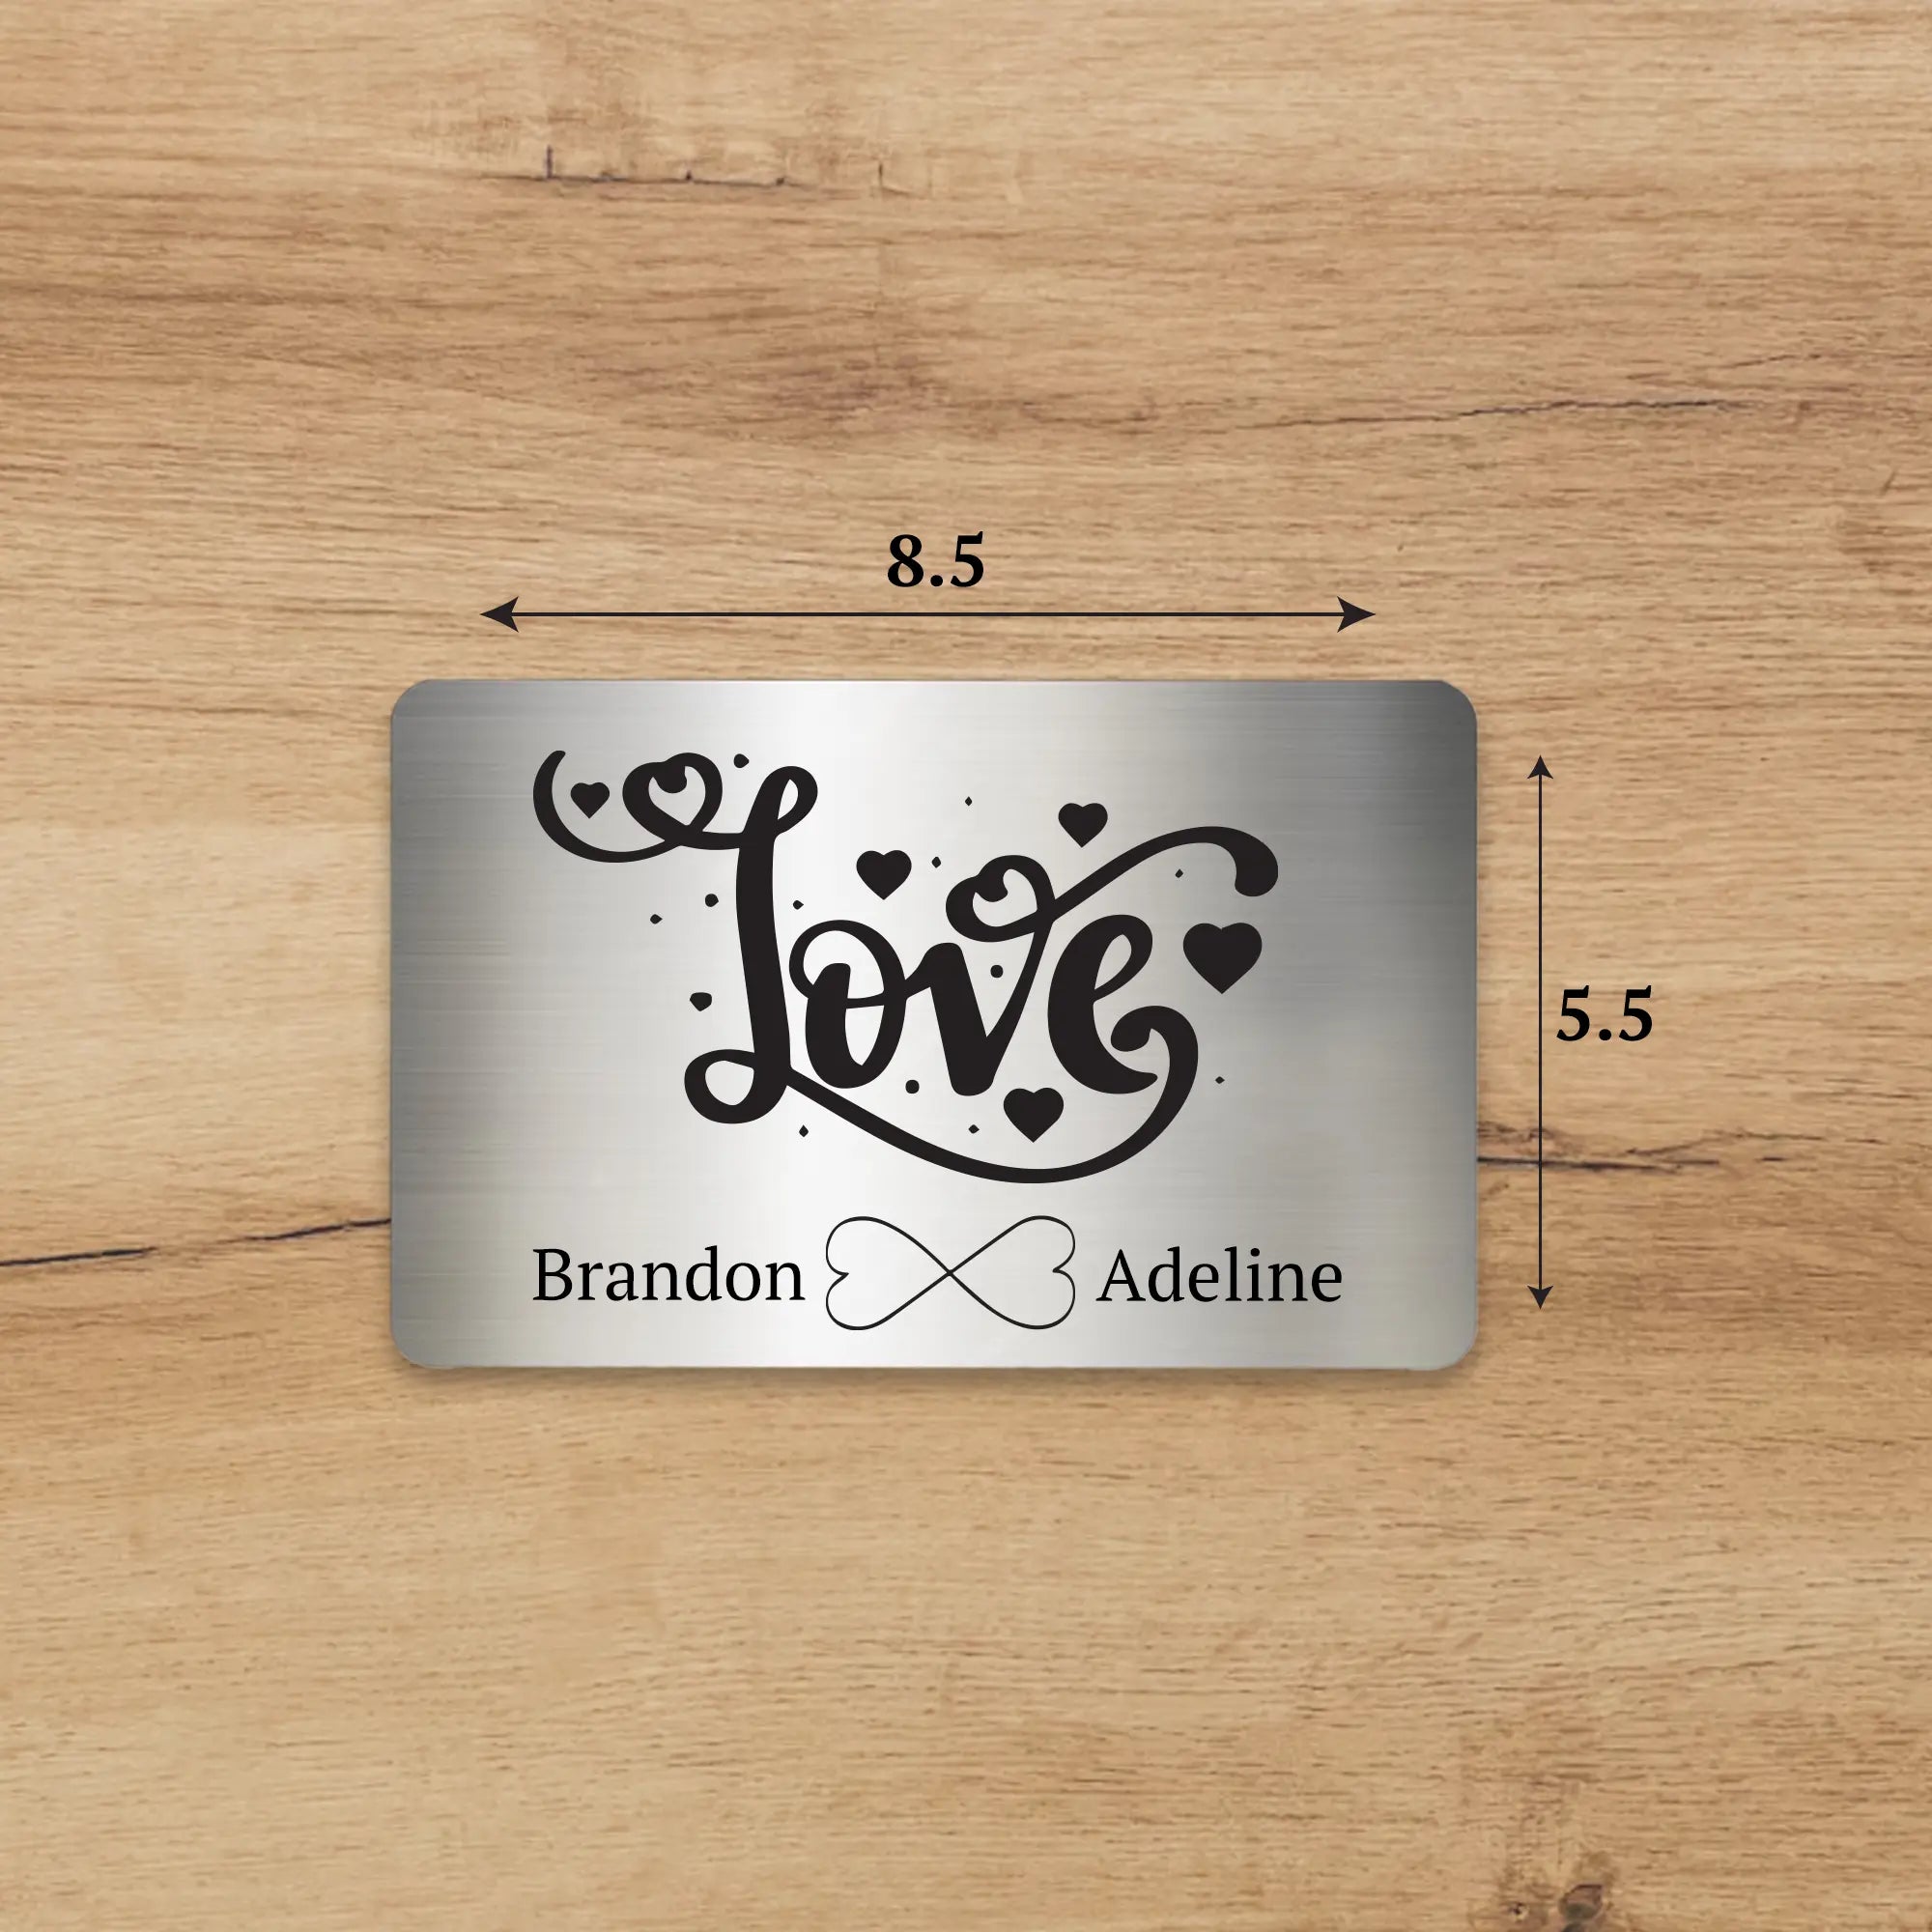 Calendar Card,Couple Name Card,Custom Photo Card,Gift For Him,Personalized Gift,Valentine Day Gift,anniversary gift,couples gift,gift for boyfriend,gift for girlfriend,gift for husband,gift for wife,metal wallet card